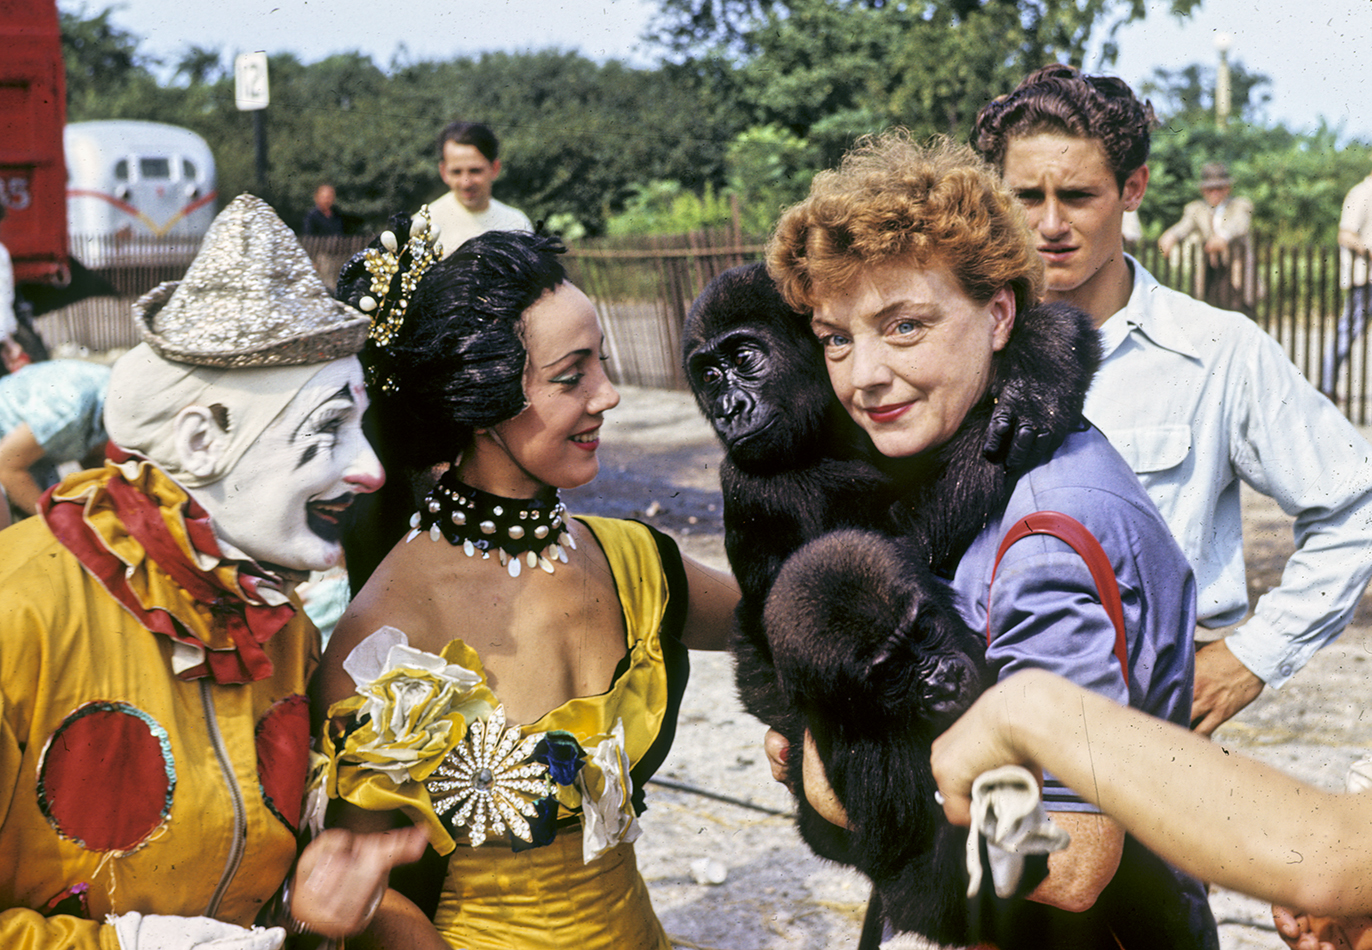 Four people in image, from left to right: a clown with white and black face paint in a yellow and red outfit, one aerialist in a yellow and black outfit, a woman in blue holding two baby gorillas, and a man in background looking at the gorillas.